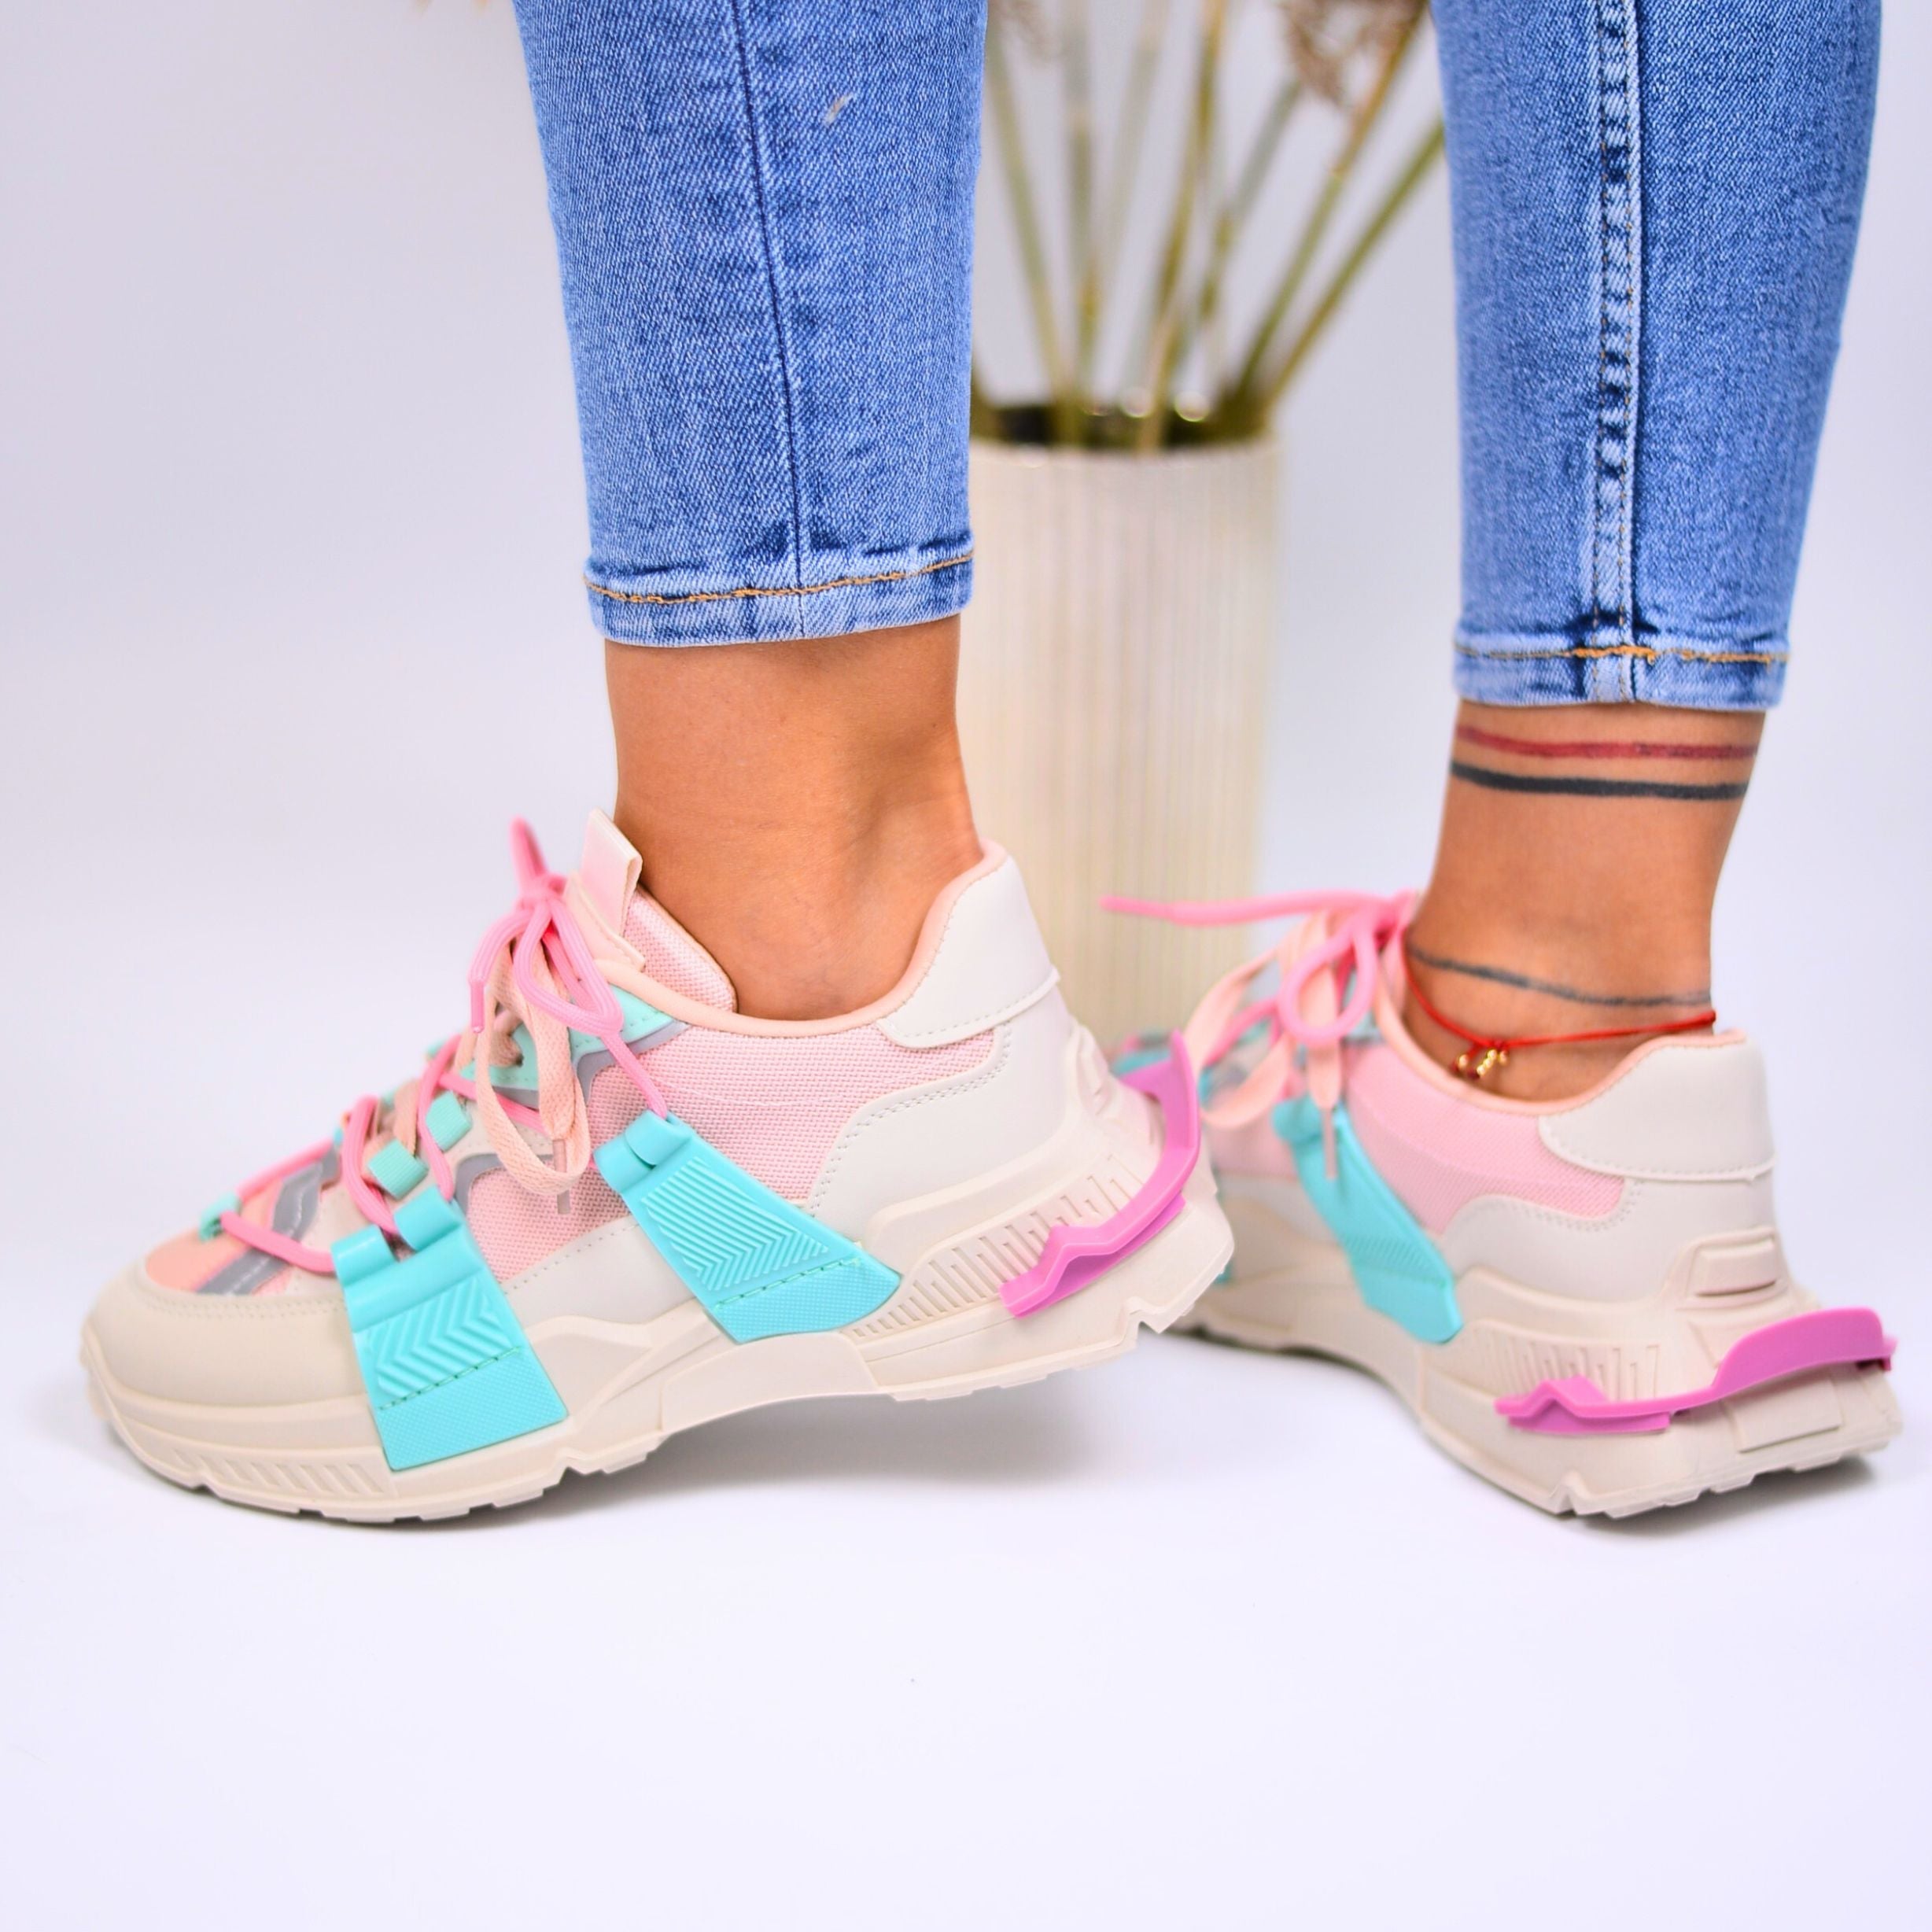 Women's Turquoise Dolce Sneakers Made Of Ecological Leather And Textile Material